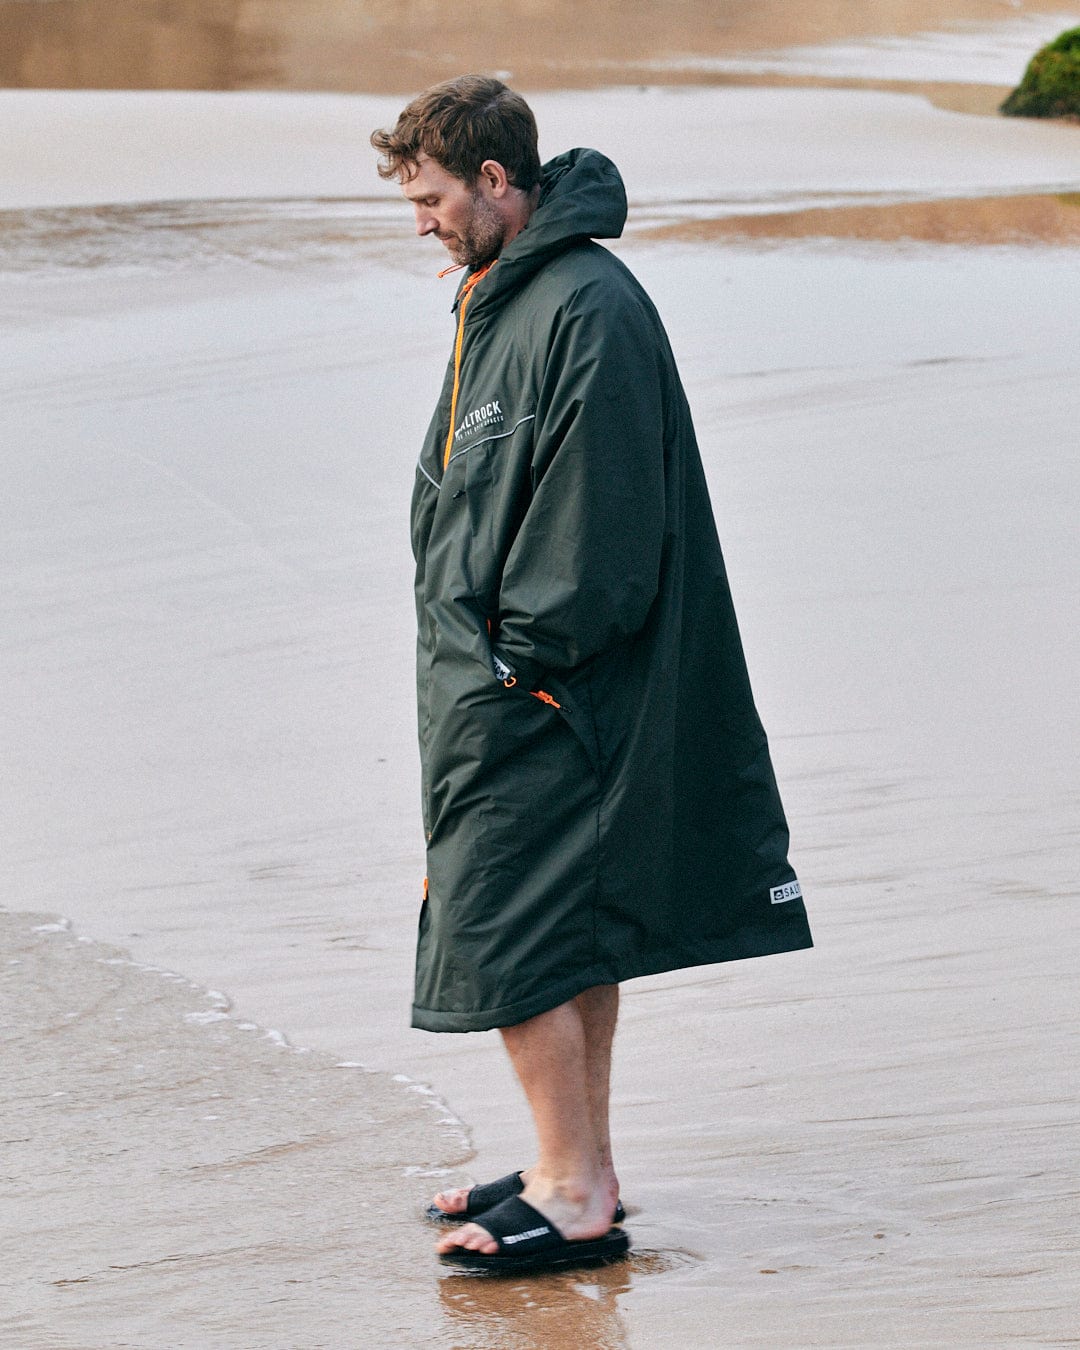 Man standing on wet sand wearing a Saltrock Recycled Four Seasons Changing Robe in Green/Aztec and sandals.